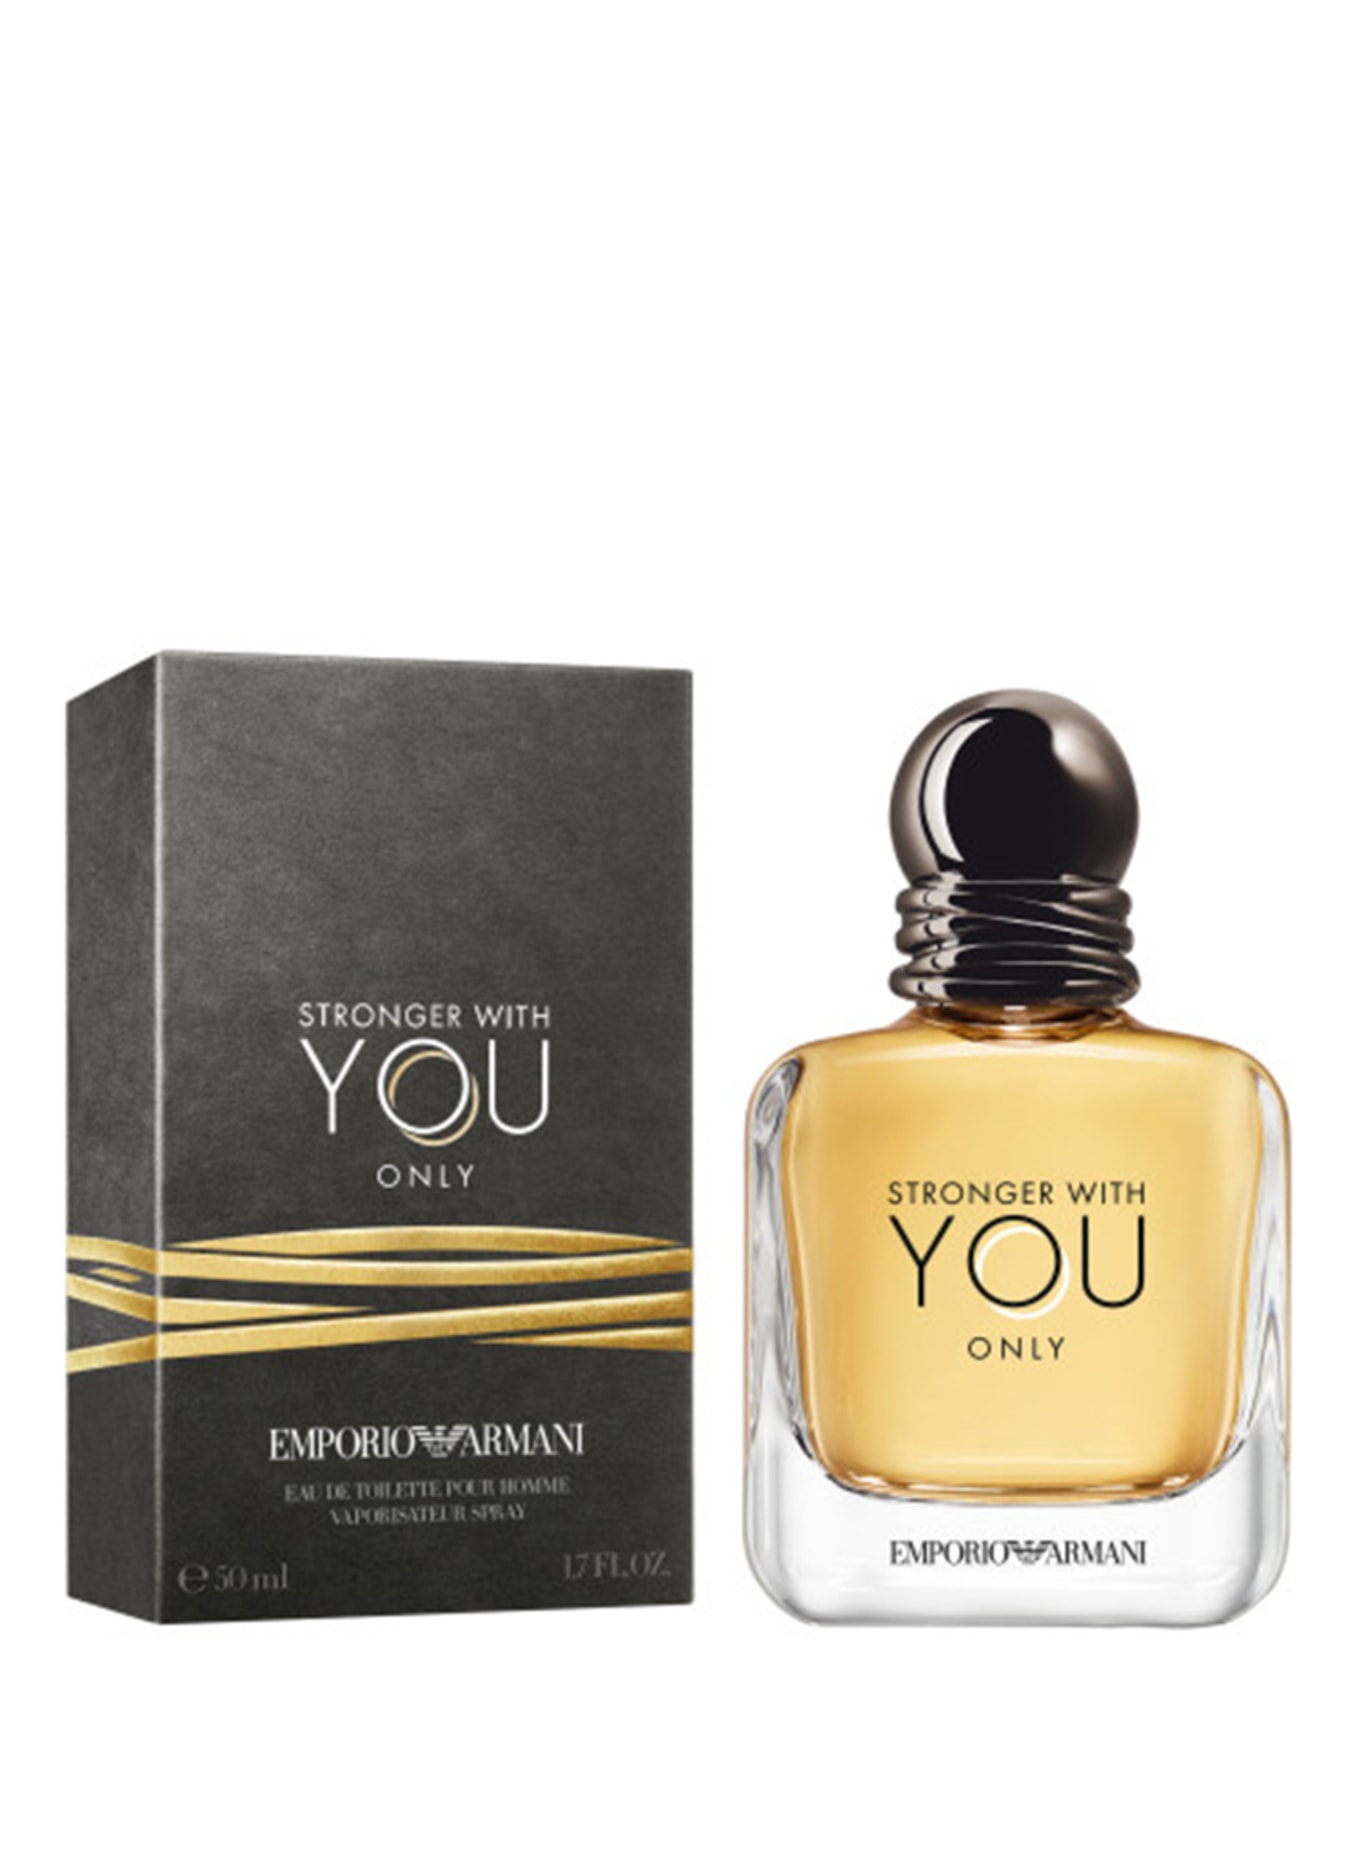 EMPORIO ARMANI STRONGER WITH YOU ONLY (Bild 2)